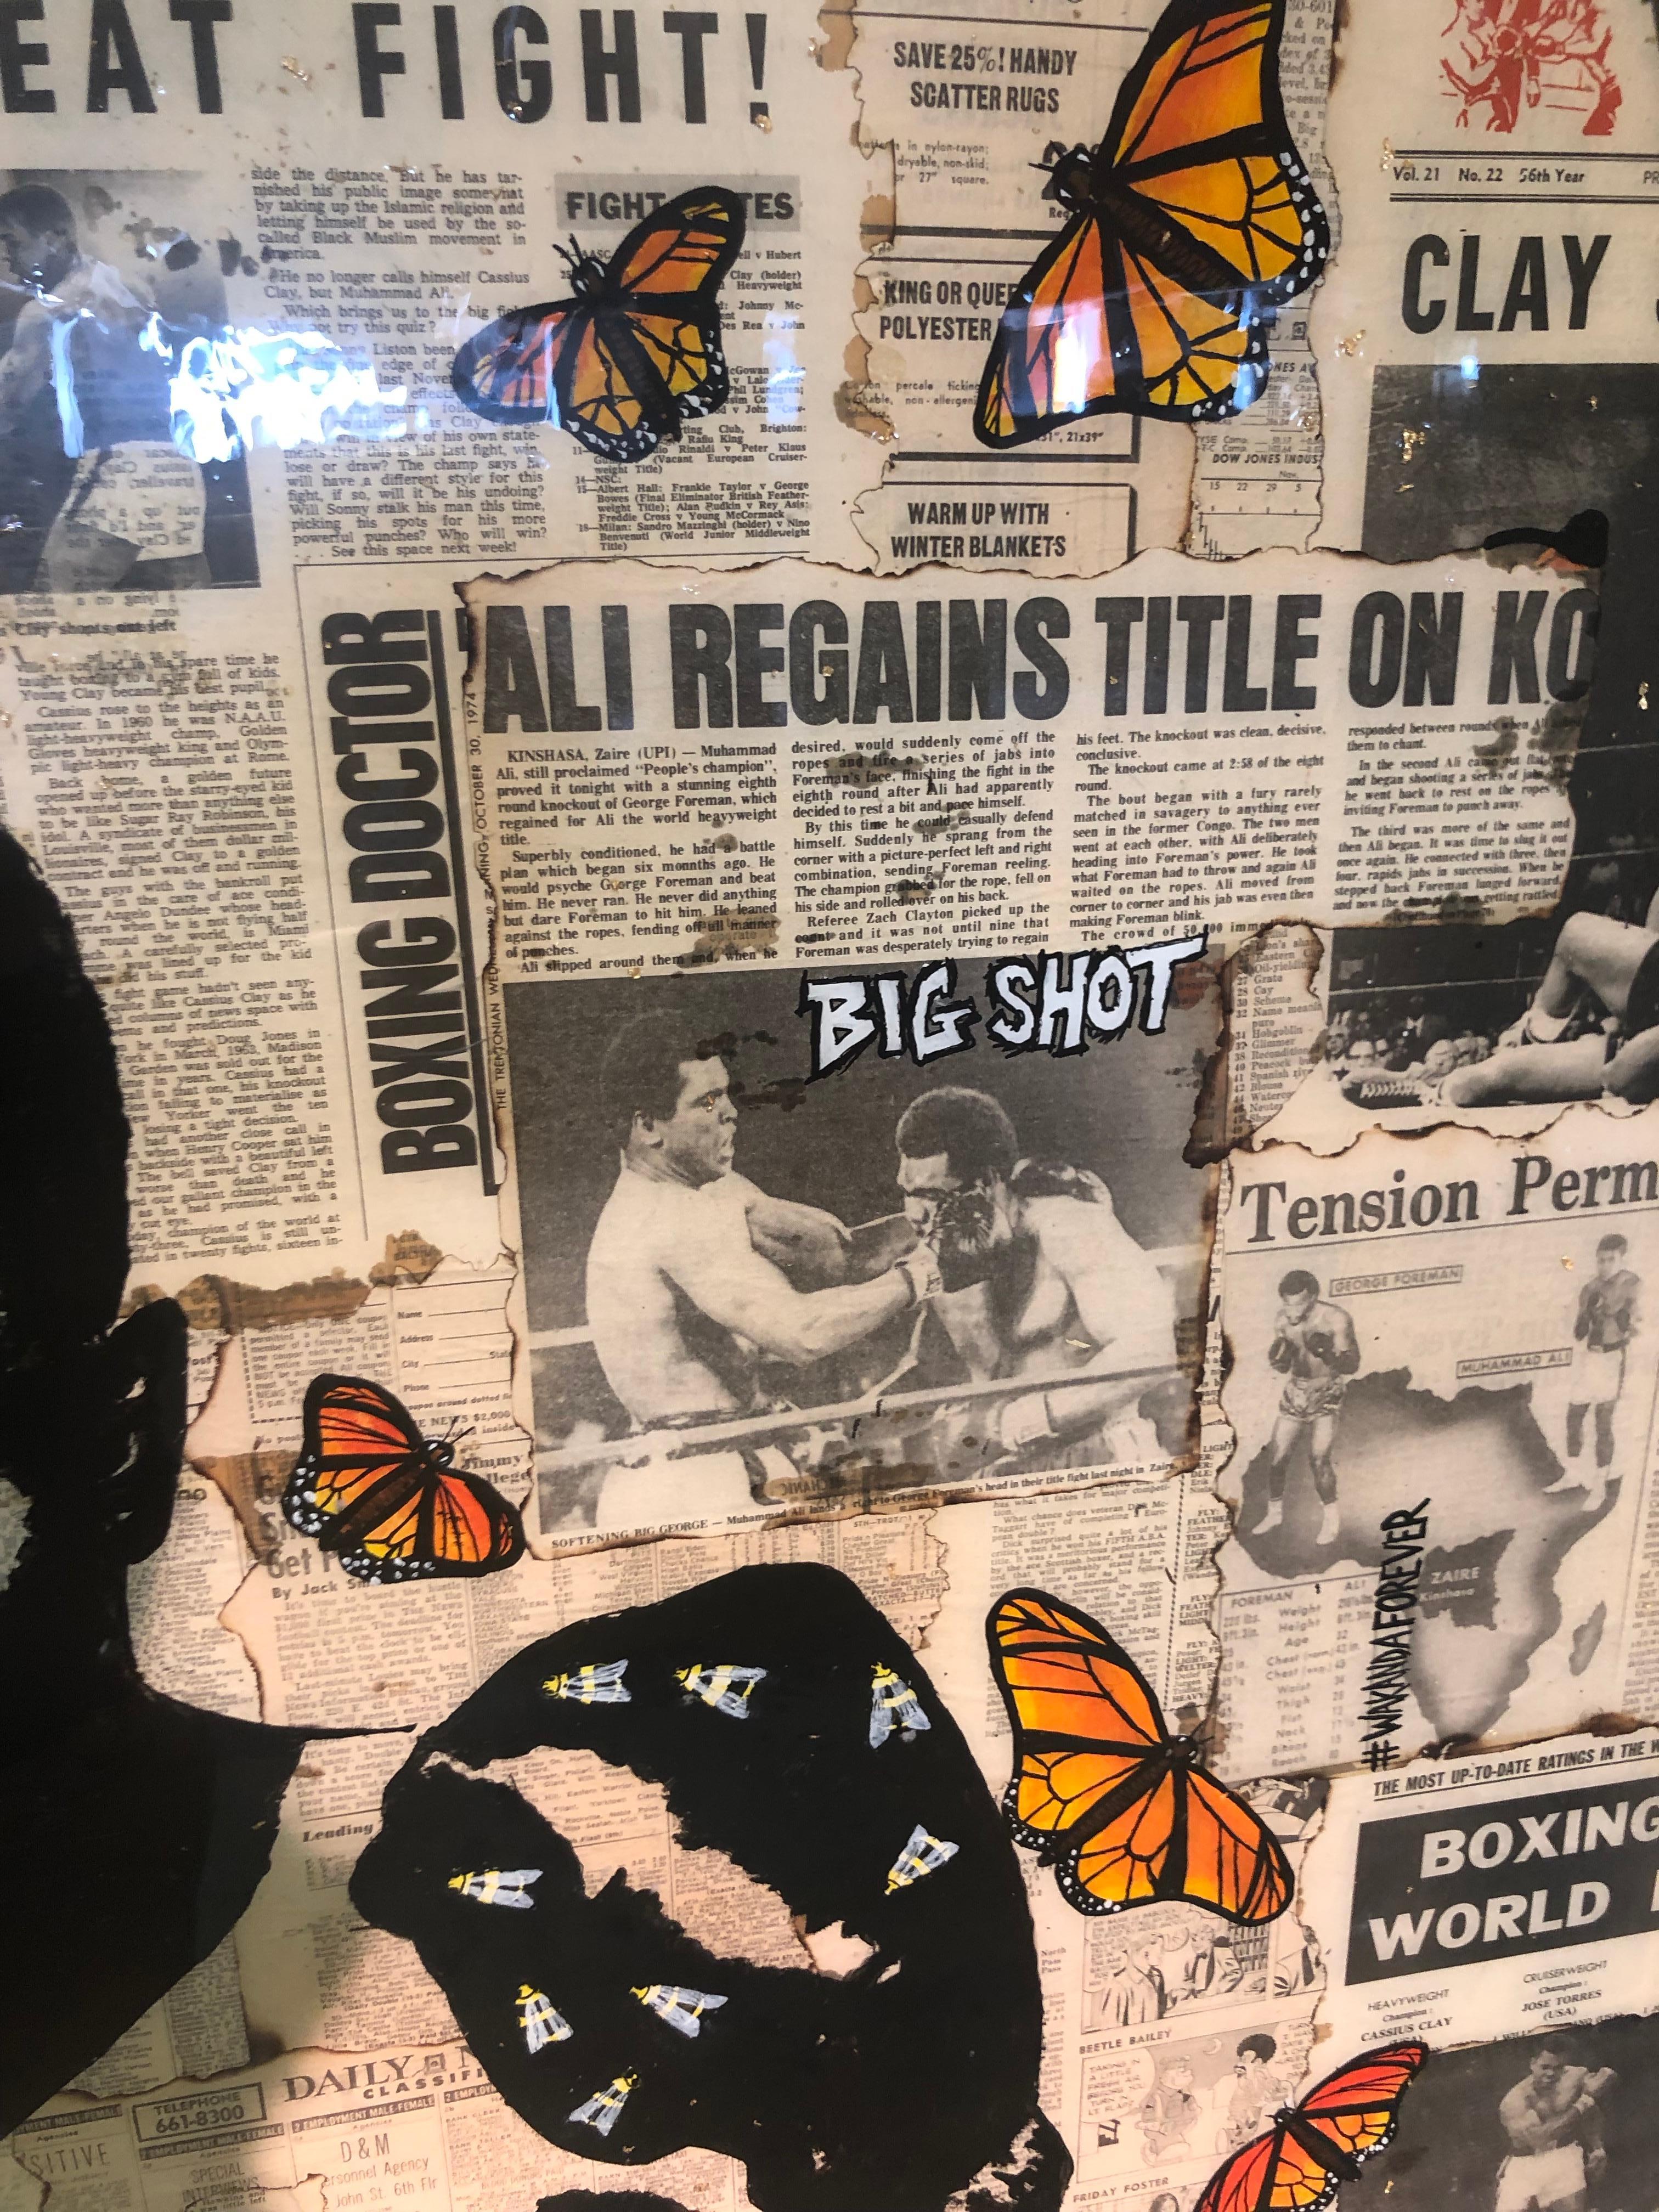 Using vintage newspapers, Patrick Burns captures some highlights from Muhammad Ali's career.  The newspapers are layered with acrylic paint and polymer resin to create a visual time capsule.  

Patrick Burns
b. 1987, Cleveland, OH
	
Bio
I like to